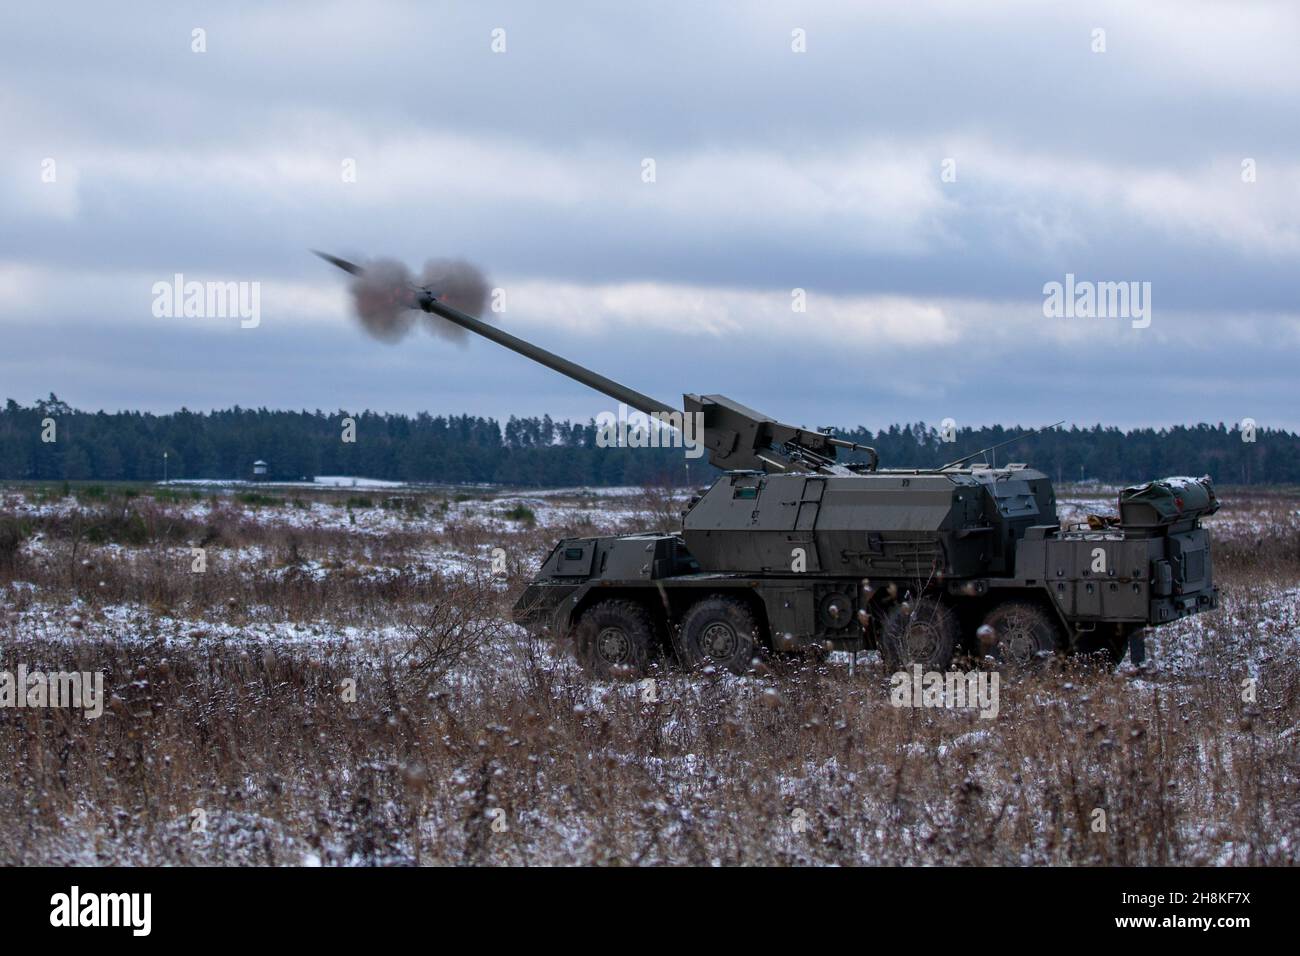 A Slovak Ground Forces Zuzana 2 155mm howitzer fires a projectile during a US-Slovak live-fire exercise at Bemowo Piskie Training Area, Poland, November 30, 2021. Slovak Ground Force’s 21st self-propelled howitzer battalion trained with NATO enhanced Forward Presence Battle Group Poland artillery assets to build combat readiness ahead of their movement to NATO enhanced Forward Presence Battle Group Latvia. The battalion will join other multinational forces as part of the Canadian-led Battle Group in support of the NATO alliance. (U.S. Army photo by Pfc. Jacob Bradford) Stock Photo